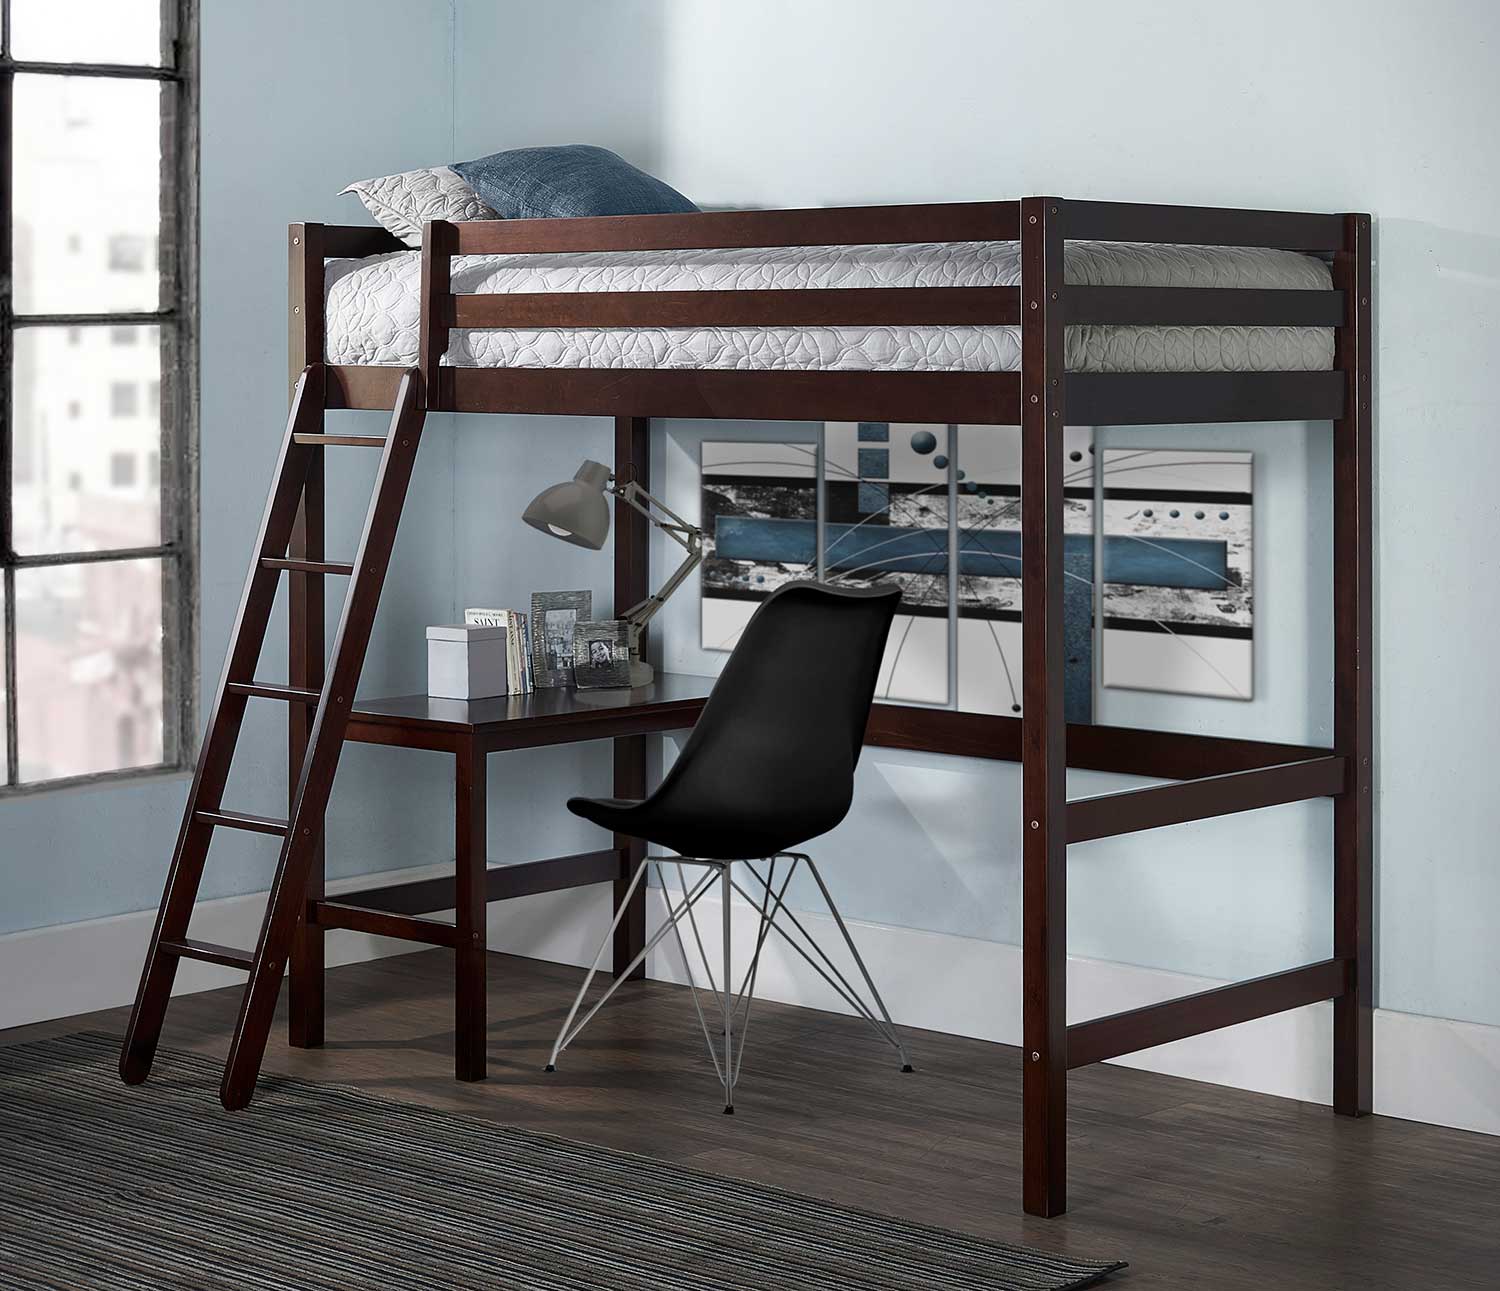 Hillsdale Caspian Twin Study Loft Bed With Chair - Chocolate